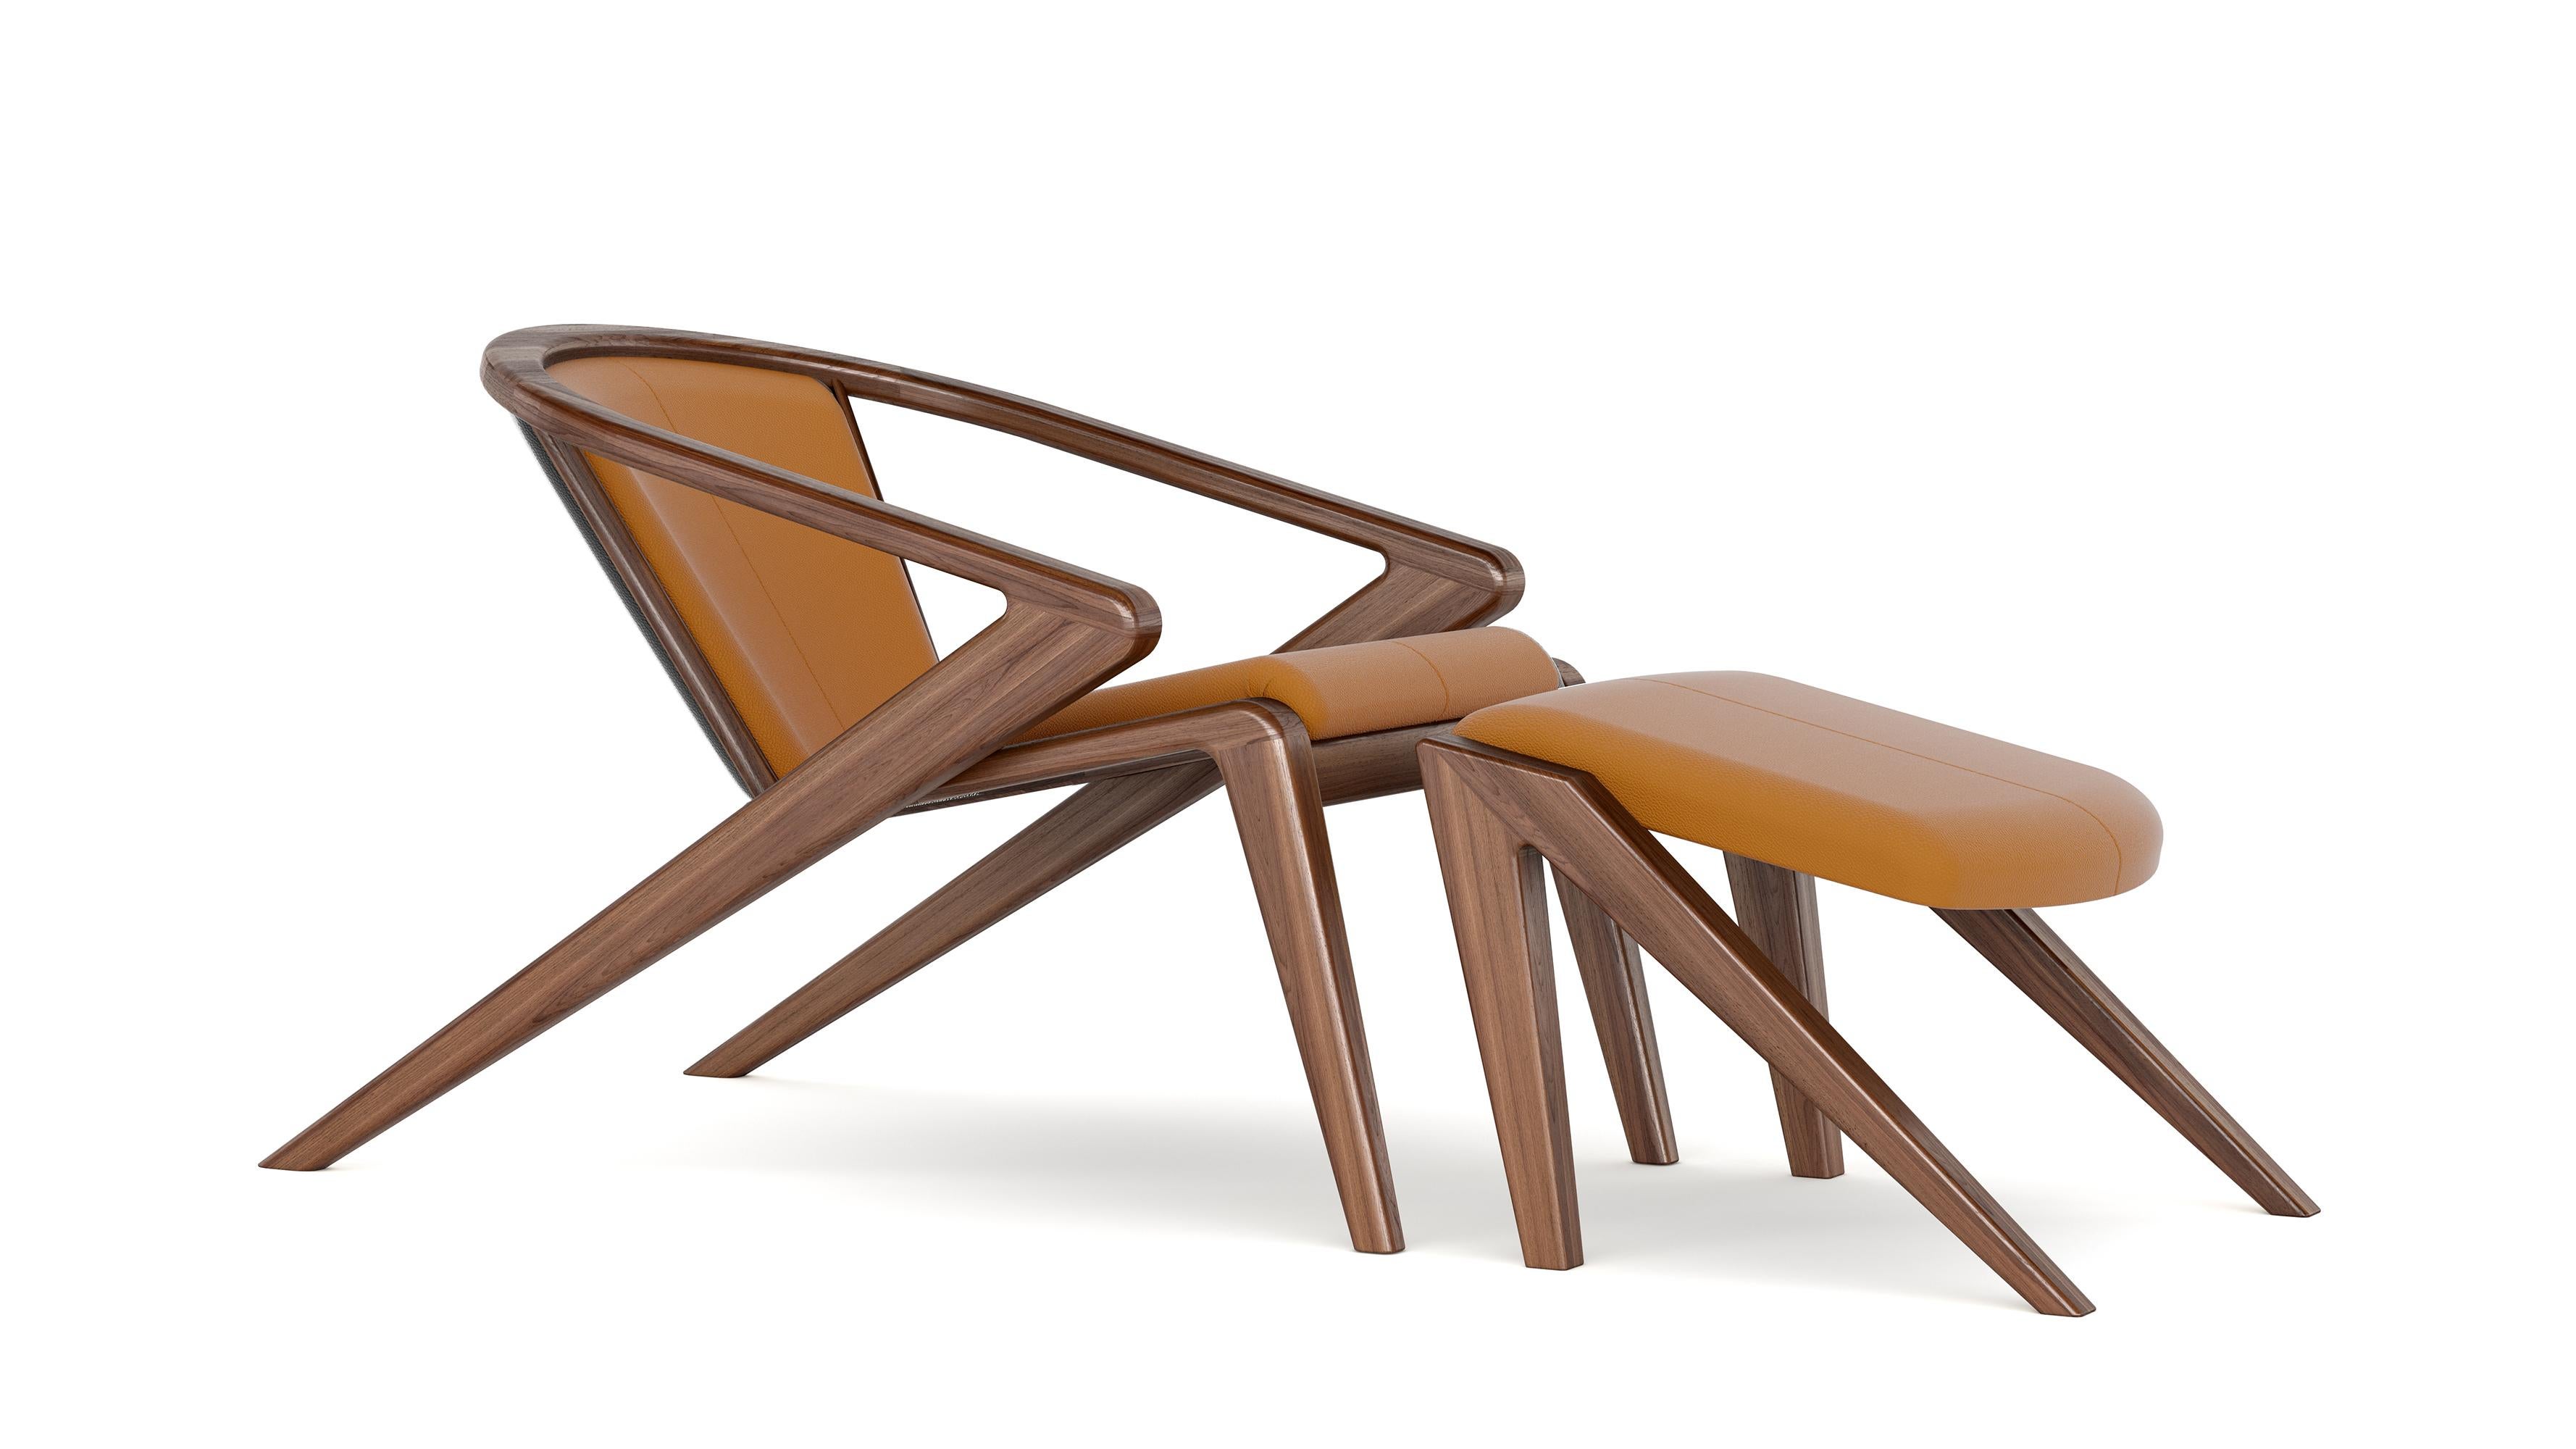 The Portuguese Roots (PR) Lounge Chair designed by Alexandre Caldas is that pure expression of 25 years of the aging process in a story, that ended with the perfect symbiosis between Art and Craftsmanship. Designed to express a story, it is also a